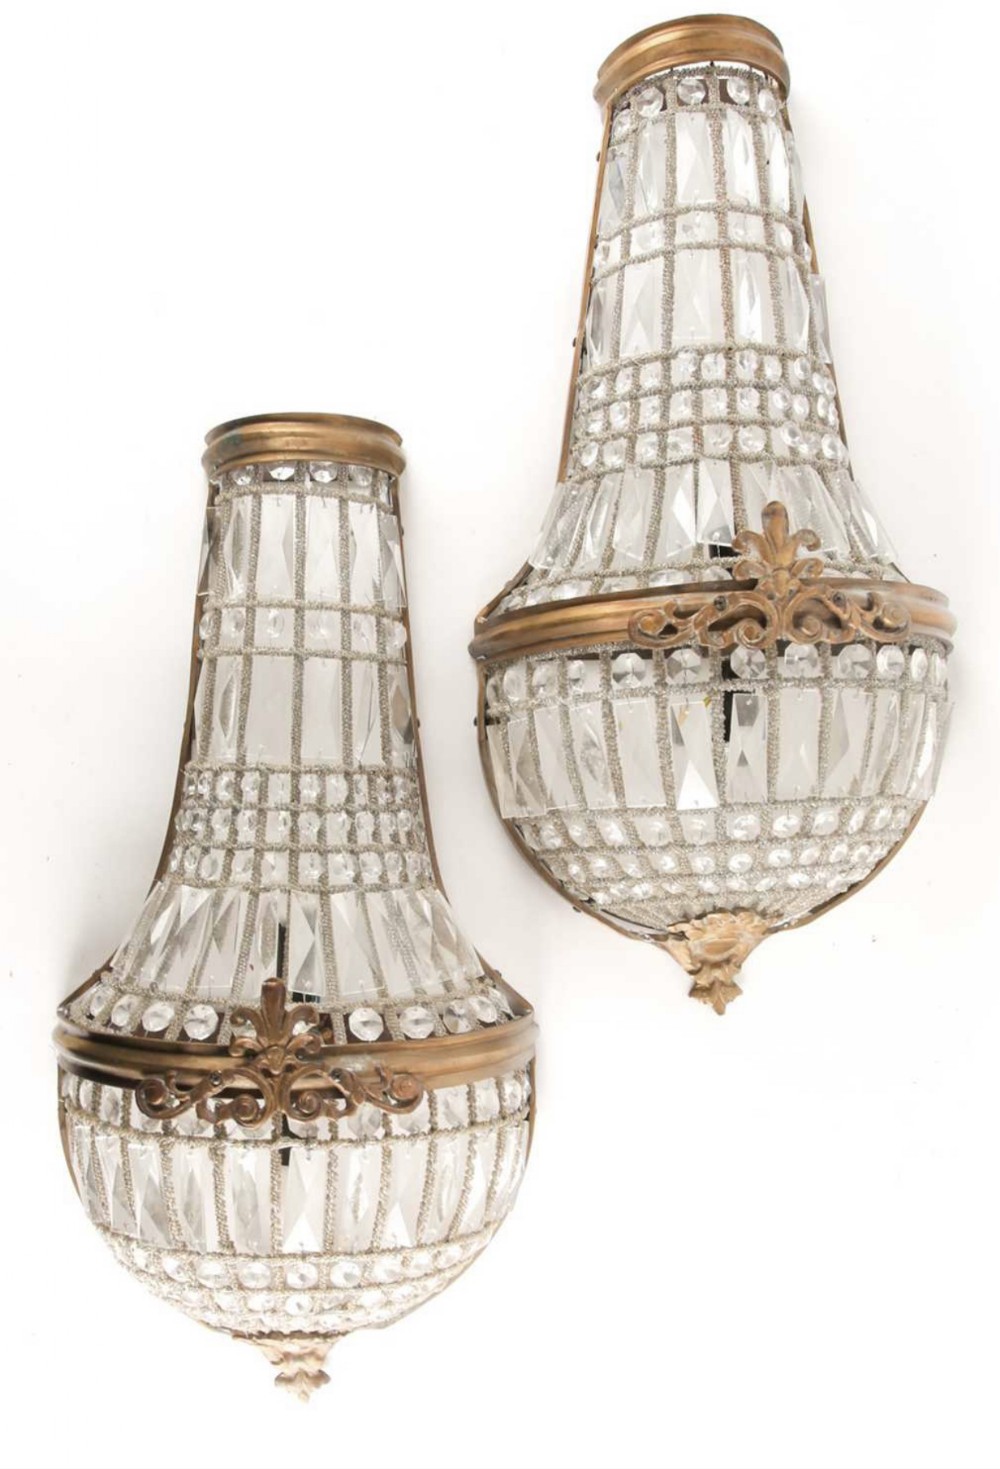 pair of large cut glass bag form wall lights